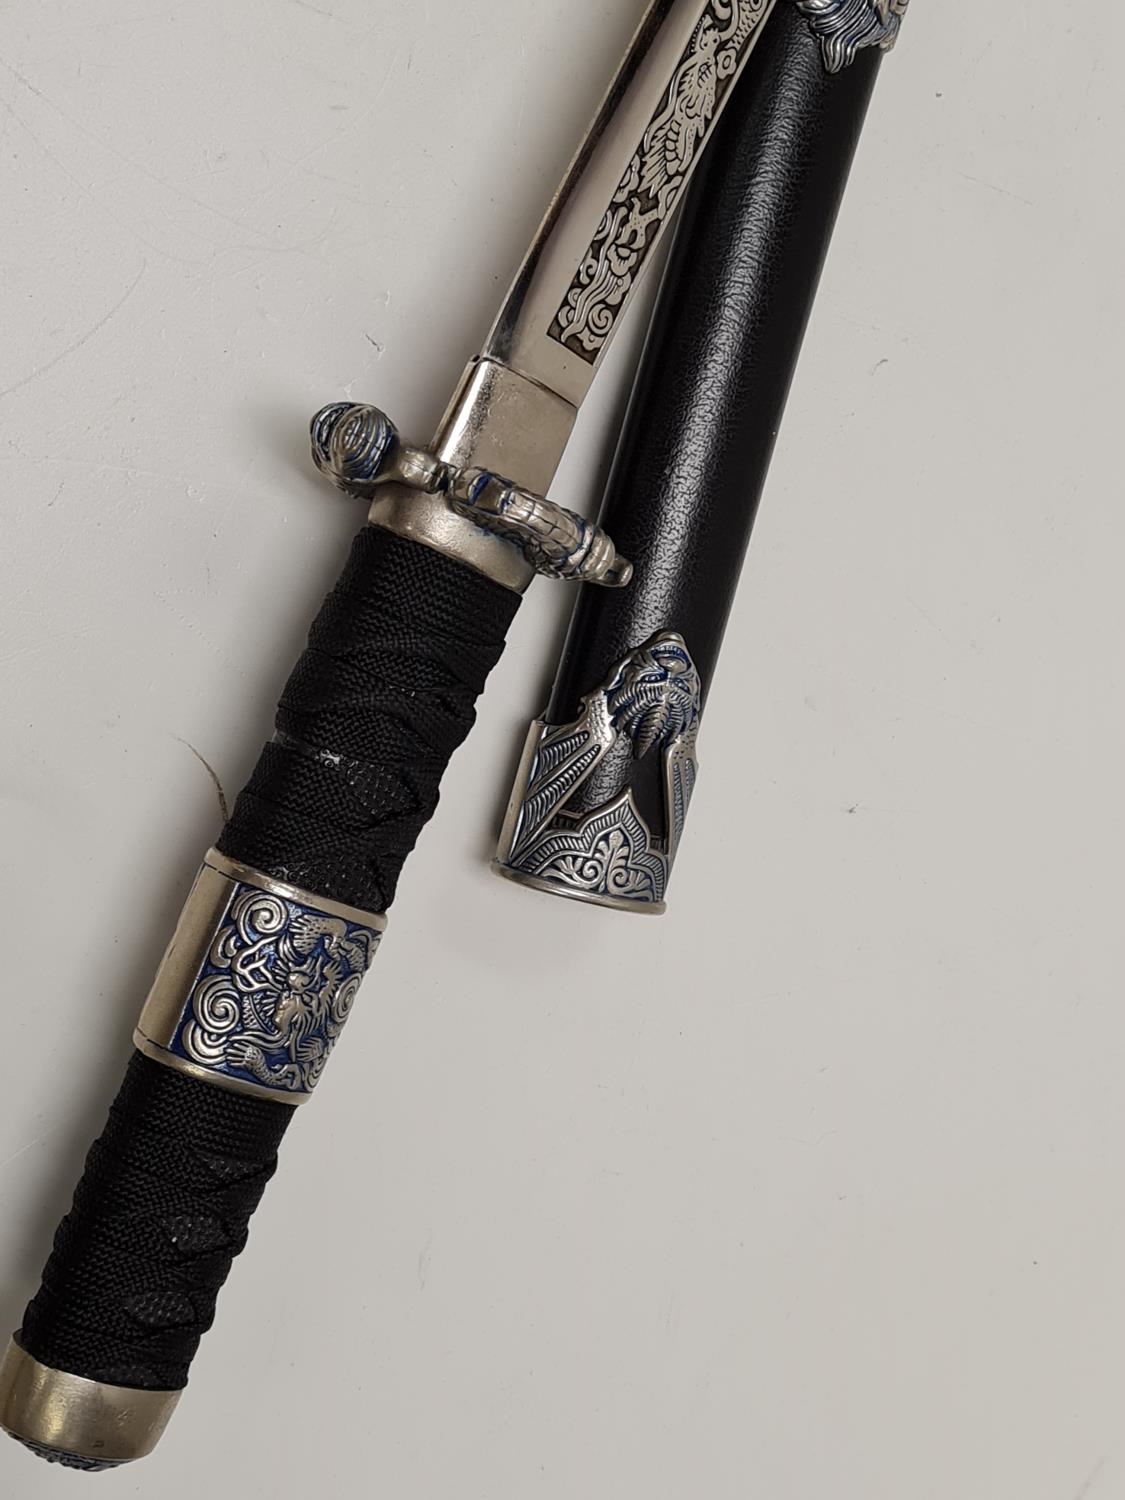 Japanese katana with dragon head decorated handle and scabbard. - Image 29 of 29